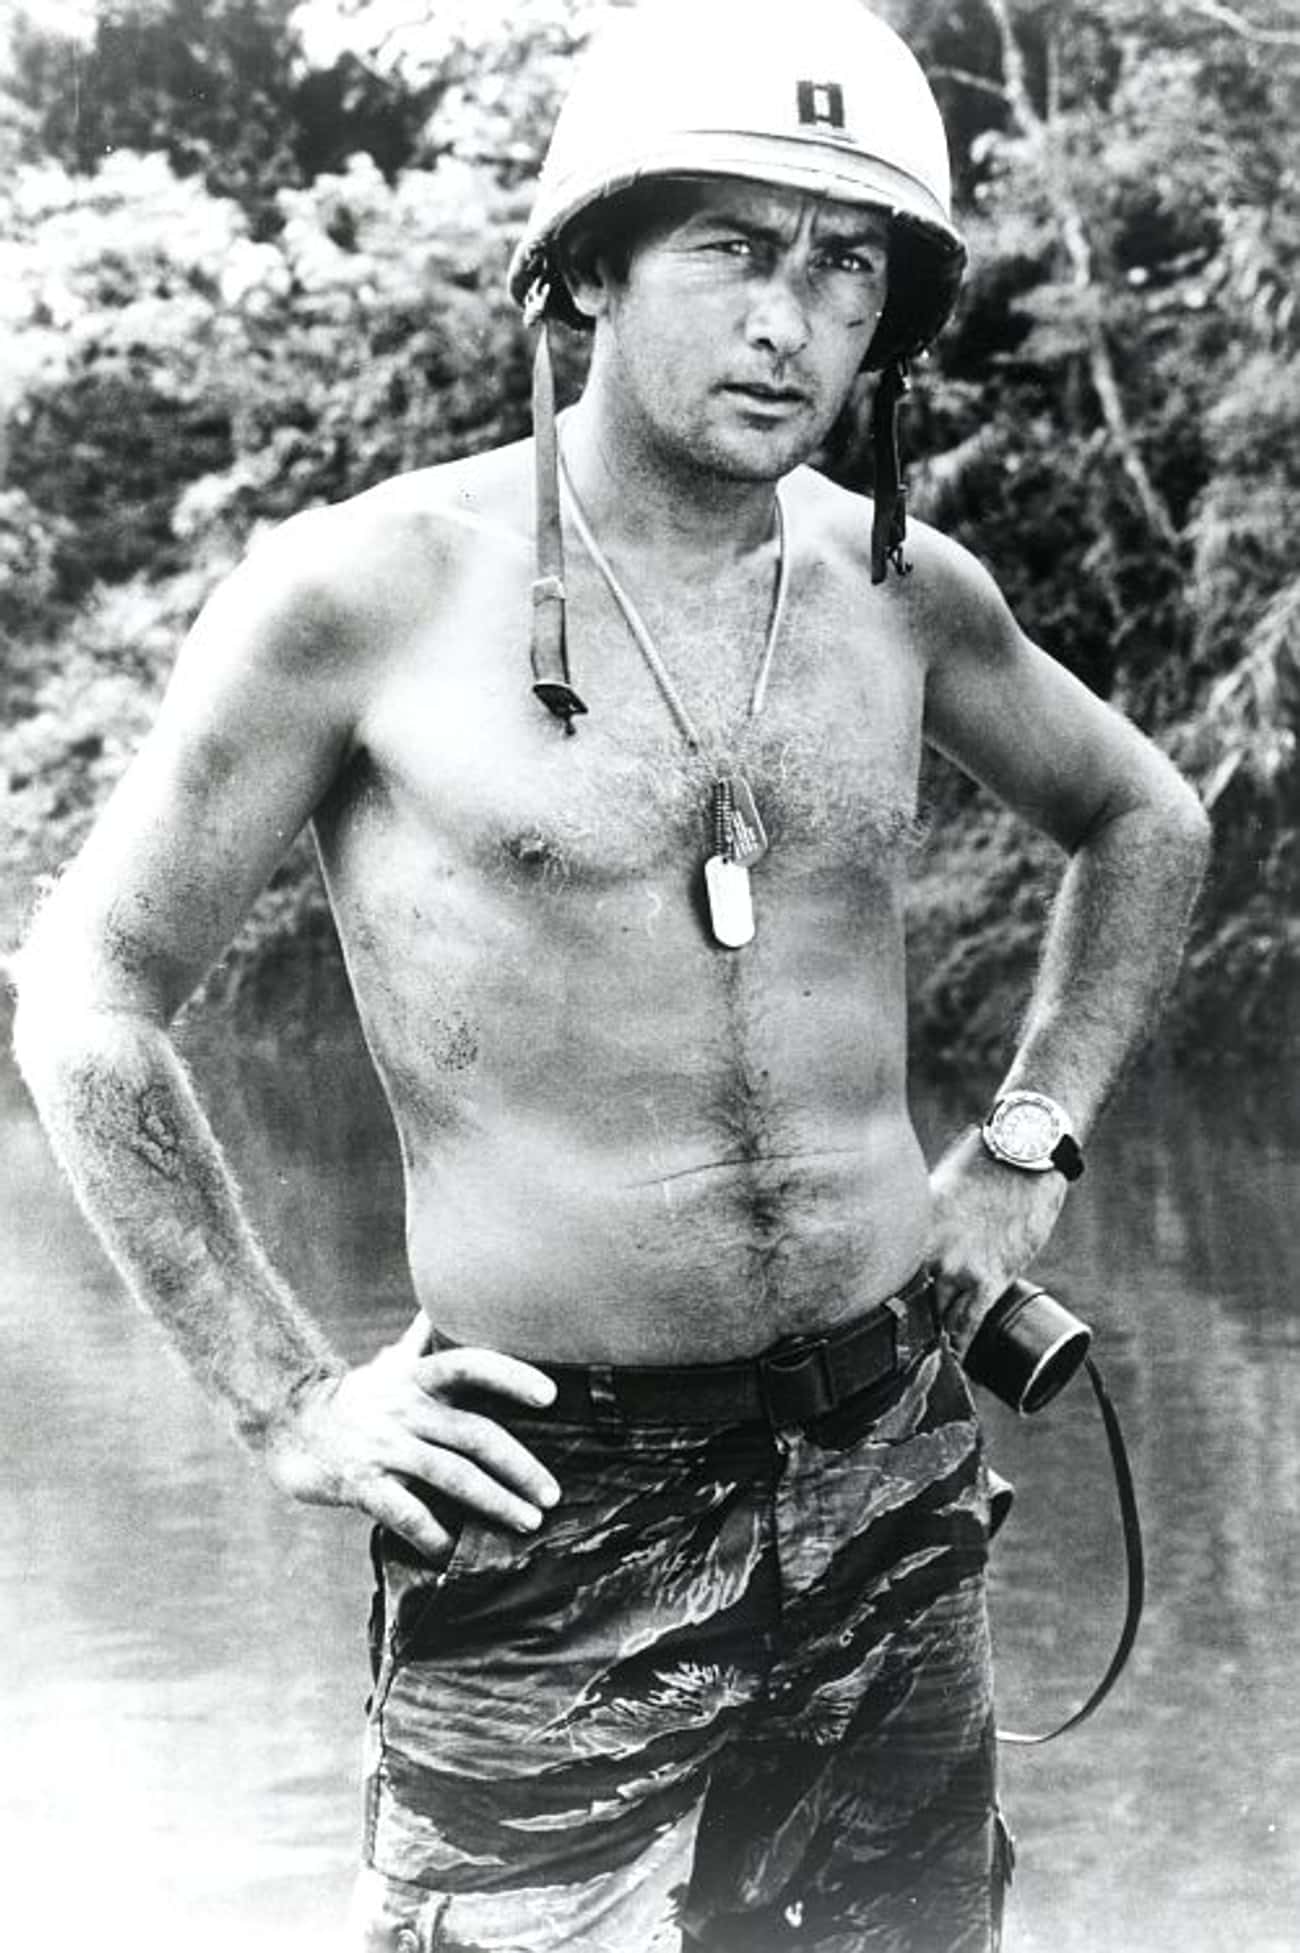 Young Martin Sheen Shirtless in Military Attire